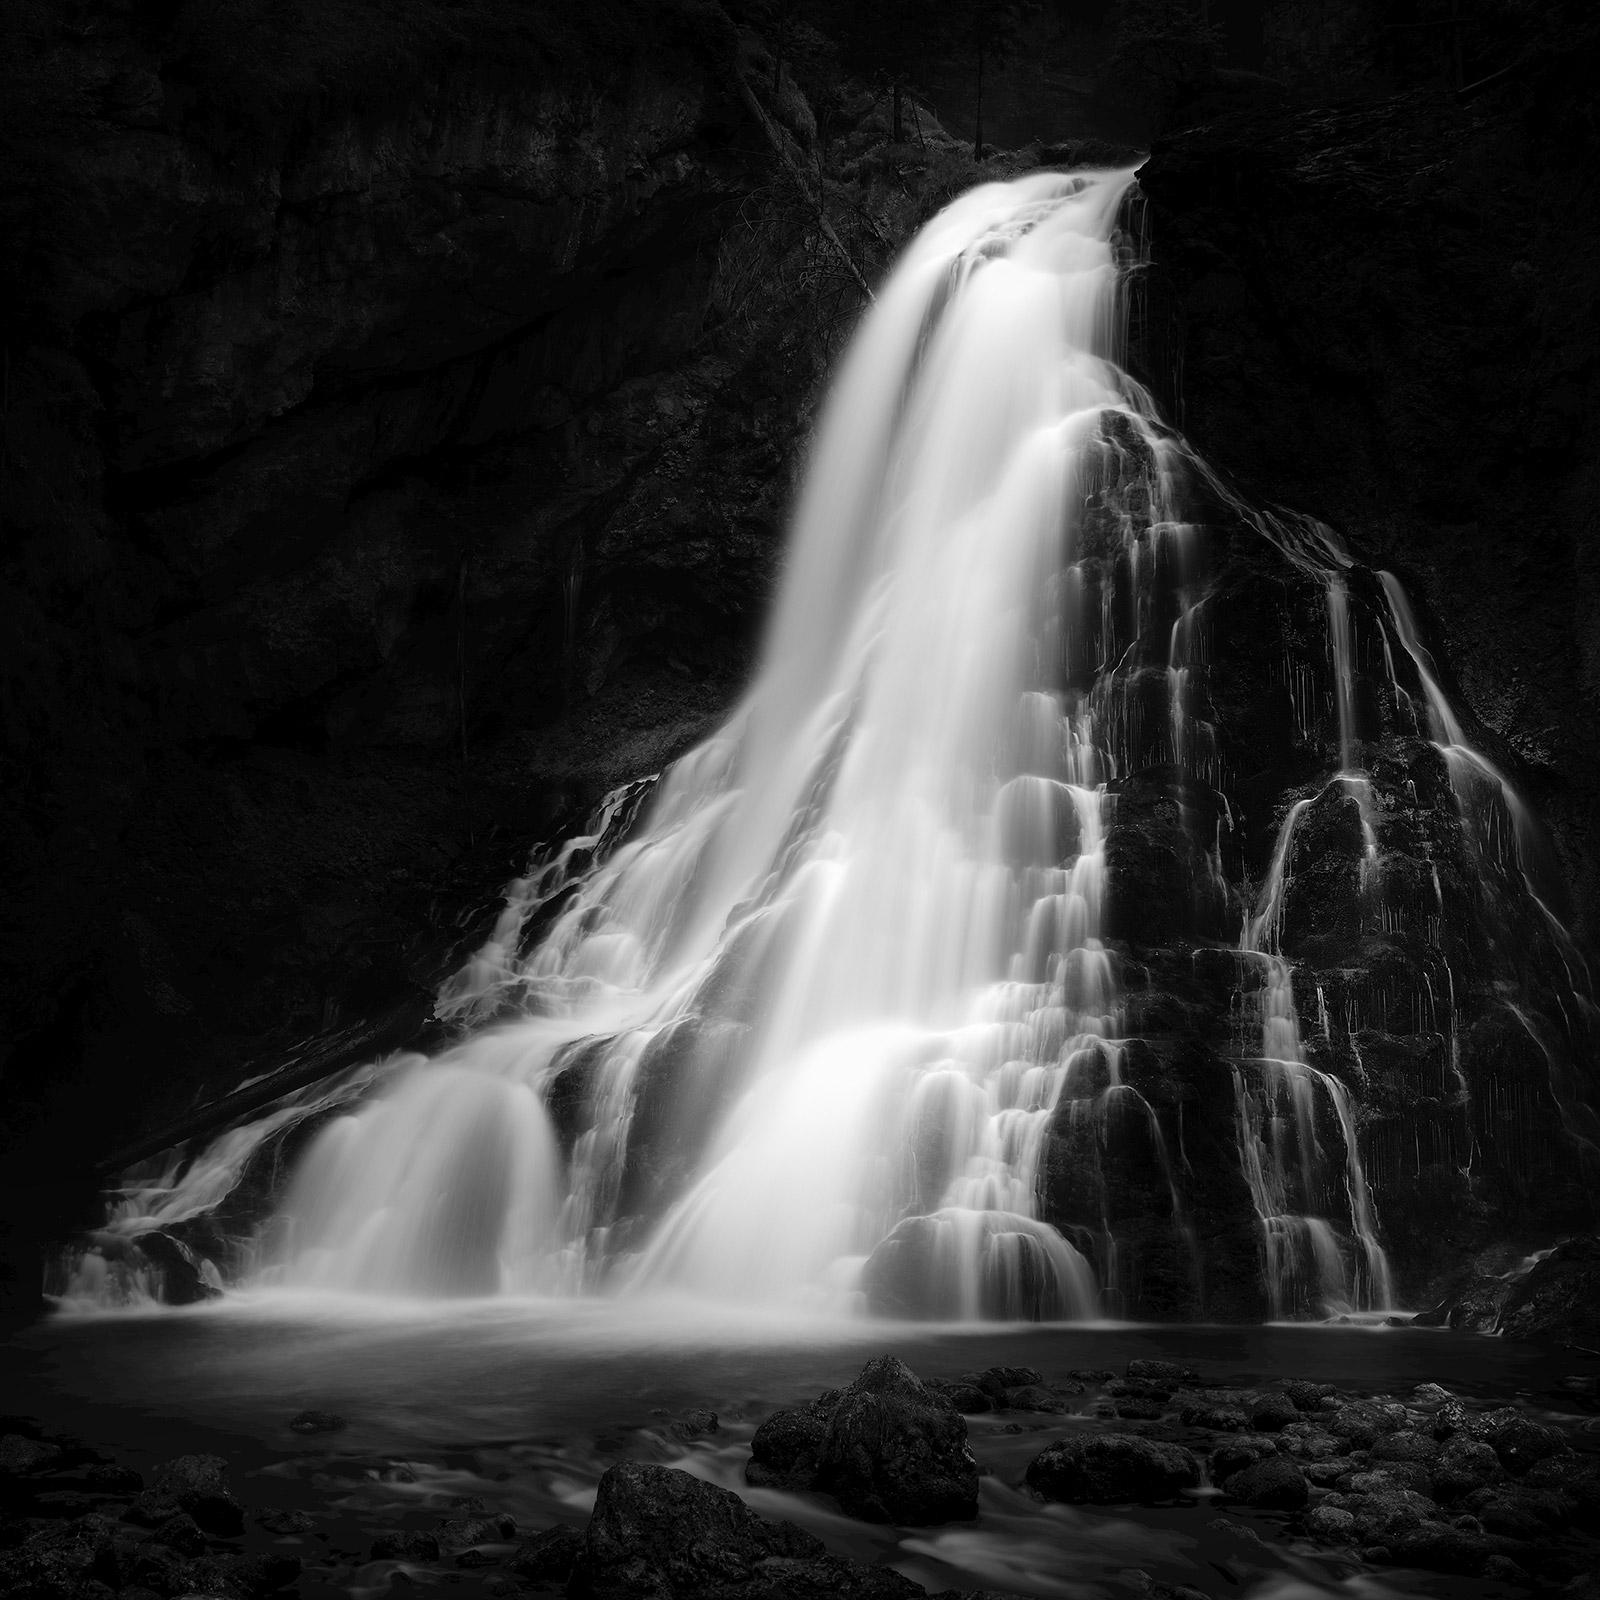 Gerald Berghammer Black and White Photograph - Golling Falls, waterfall, black and white art photography, waterscape, landscape